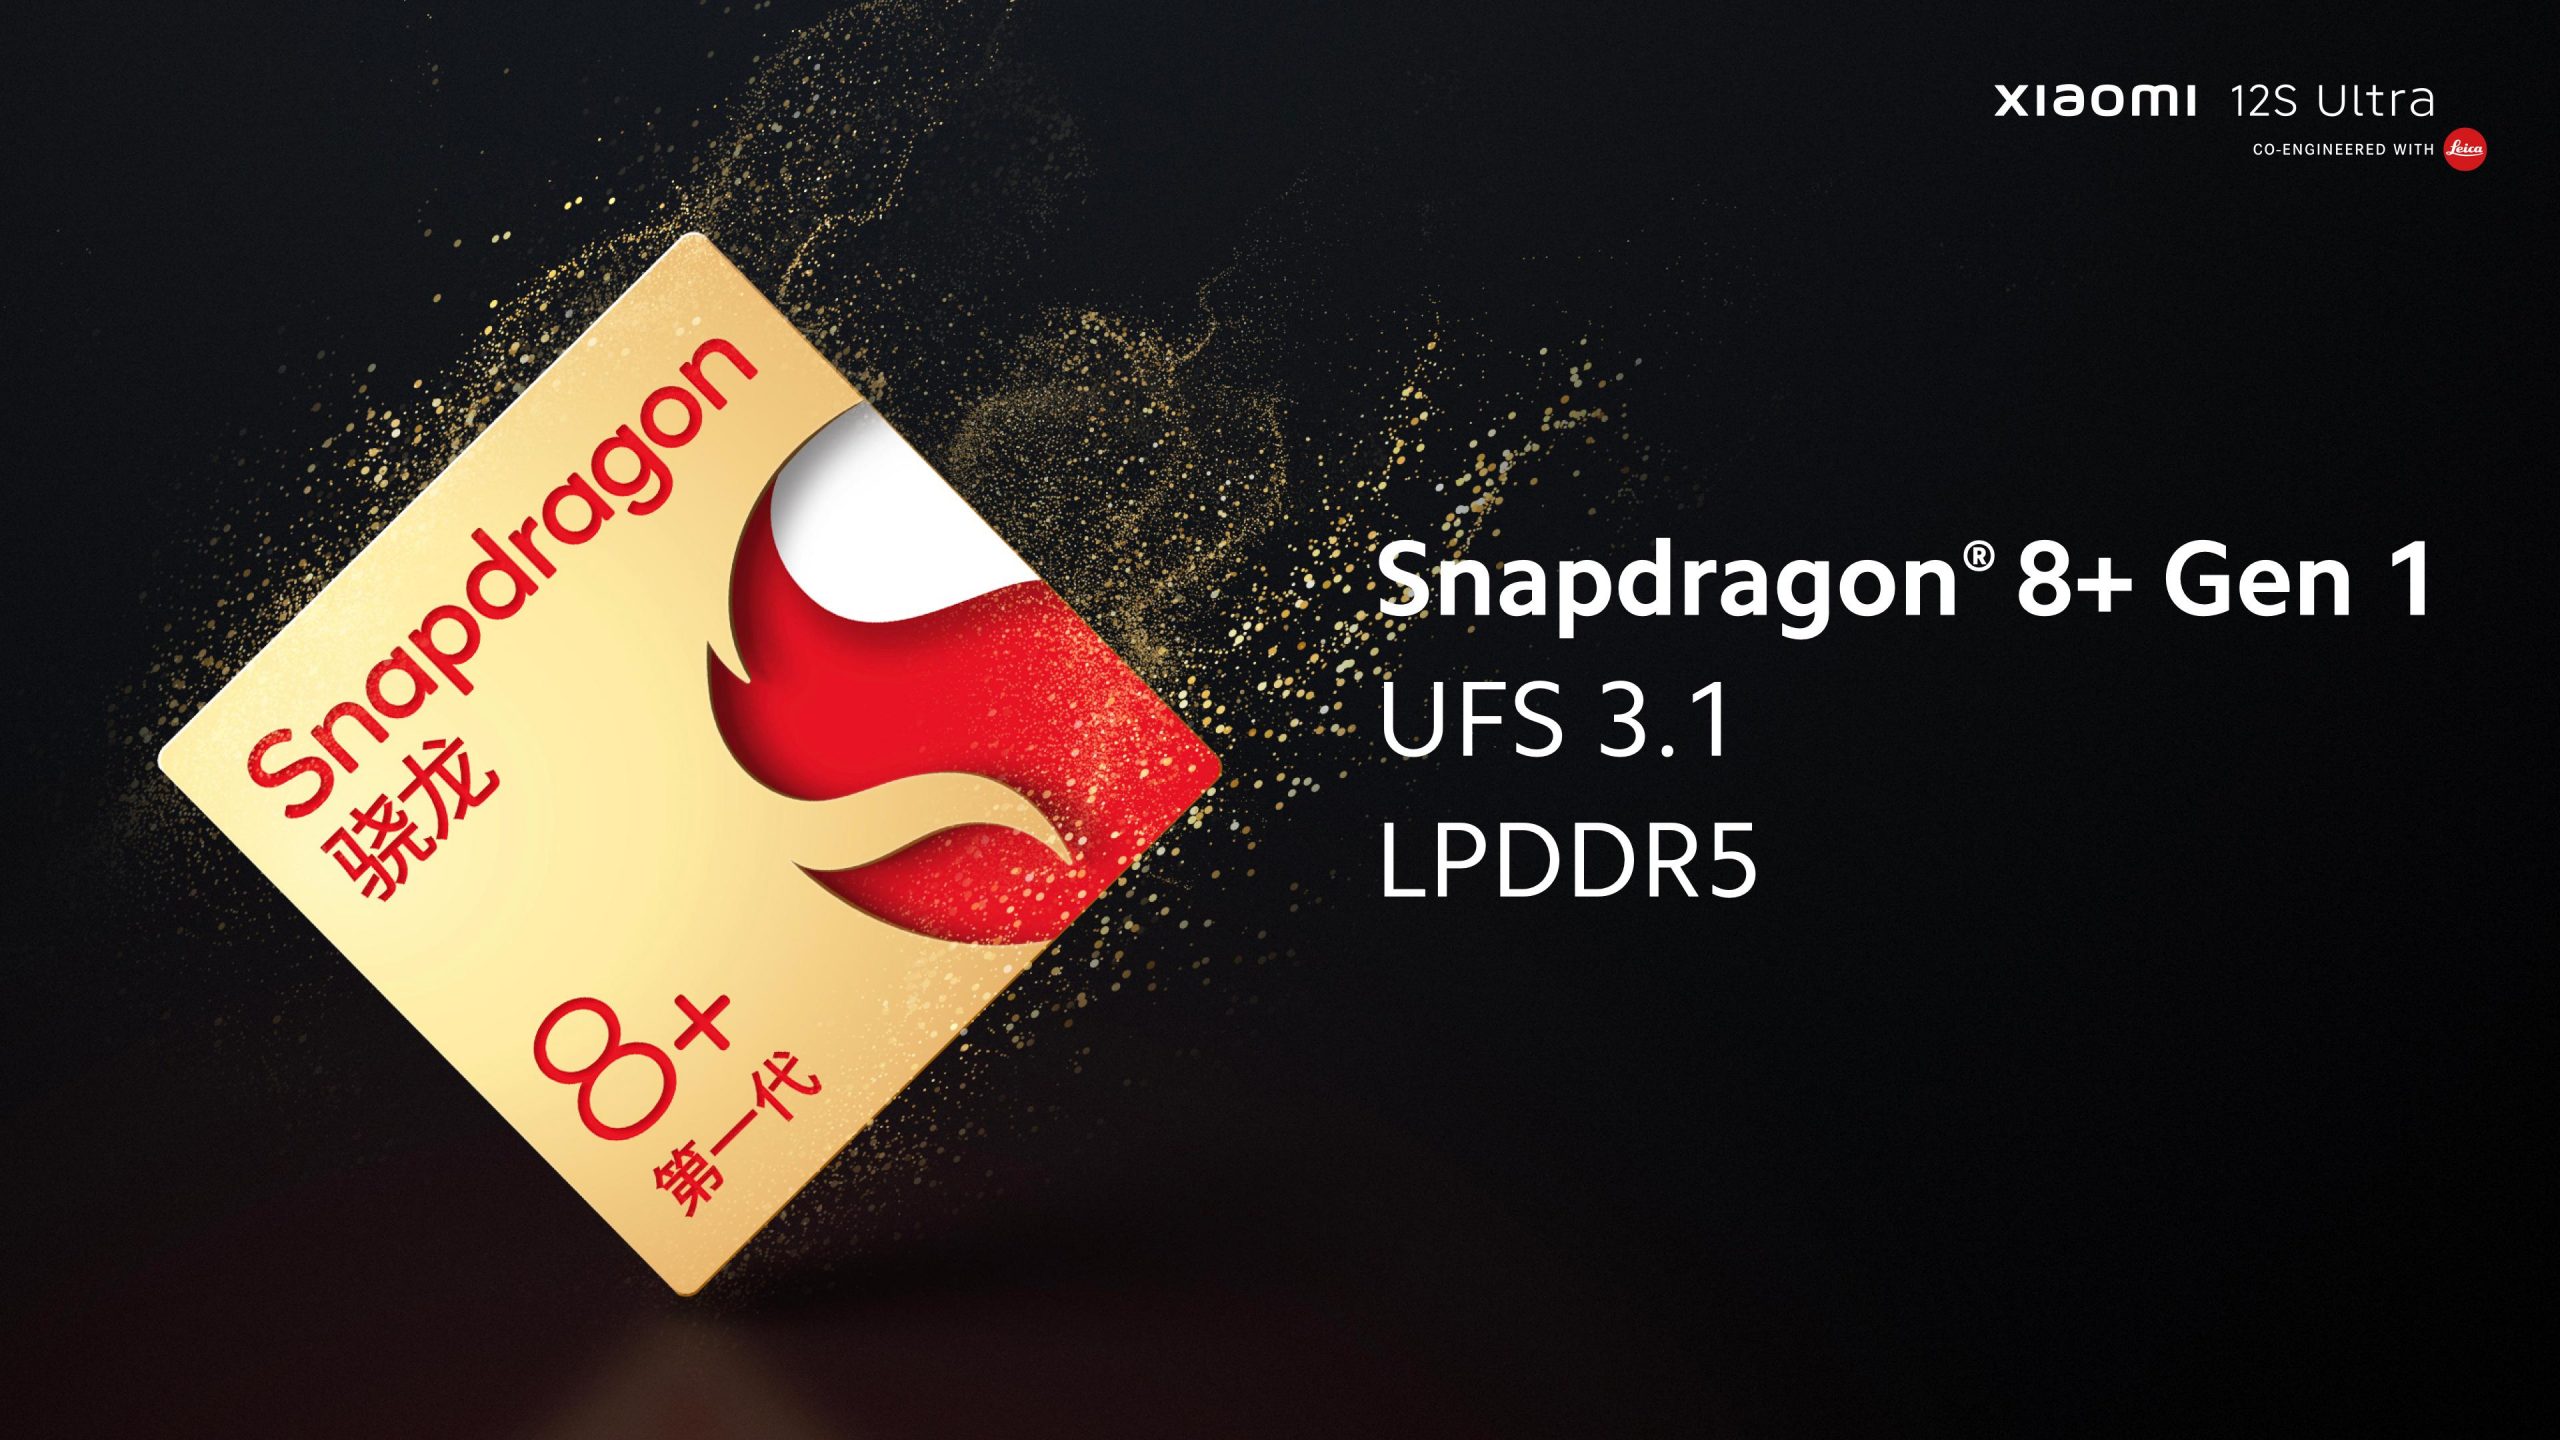 The Snapdragon 8+ Gen 1 powers the 12S ultra.